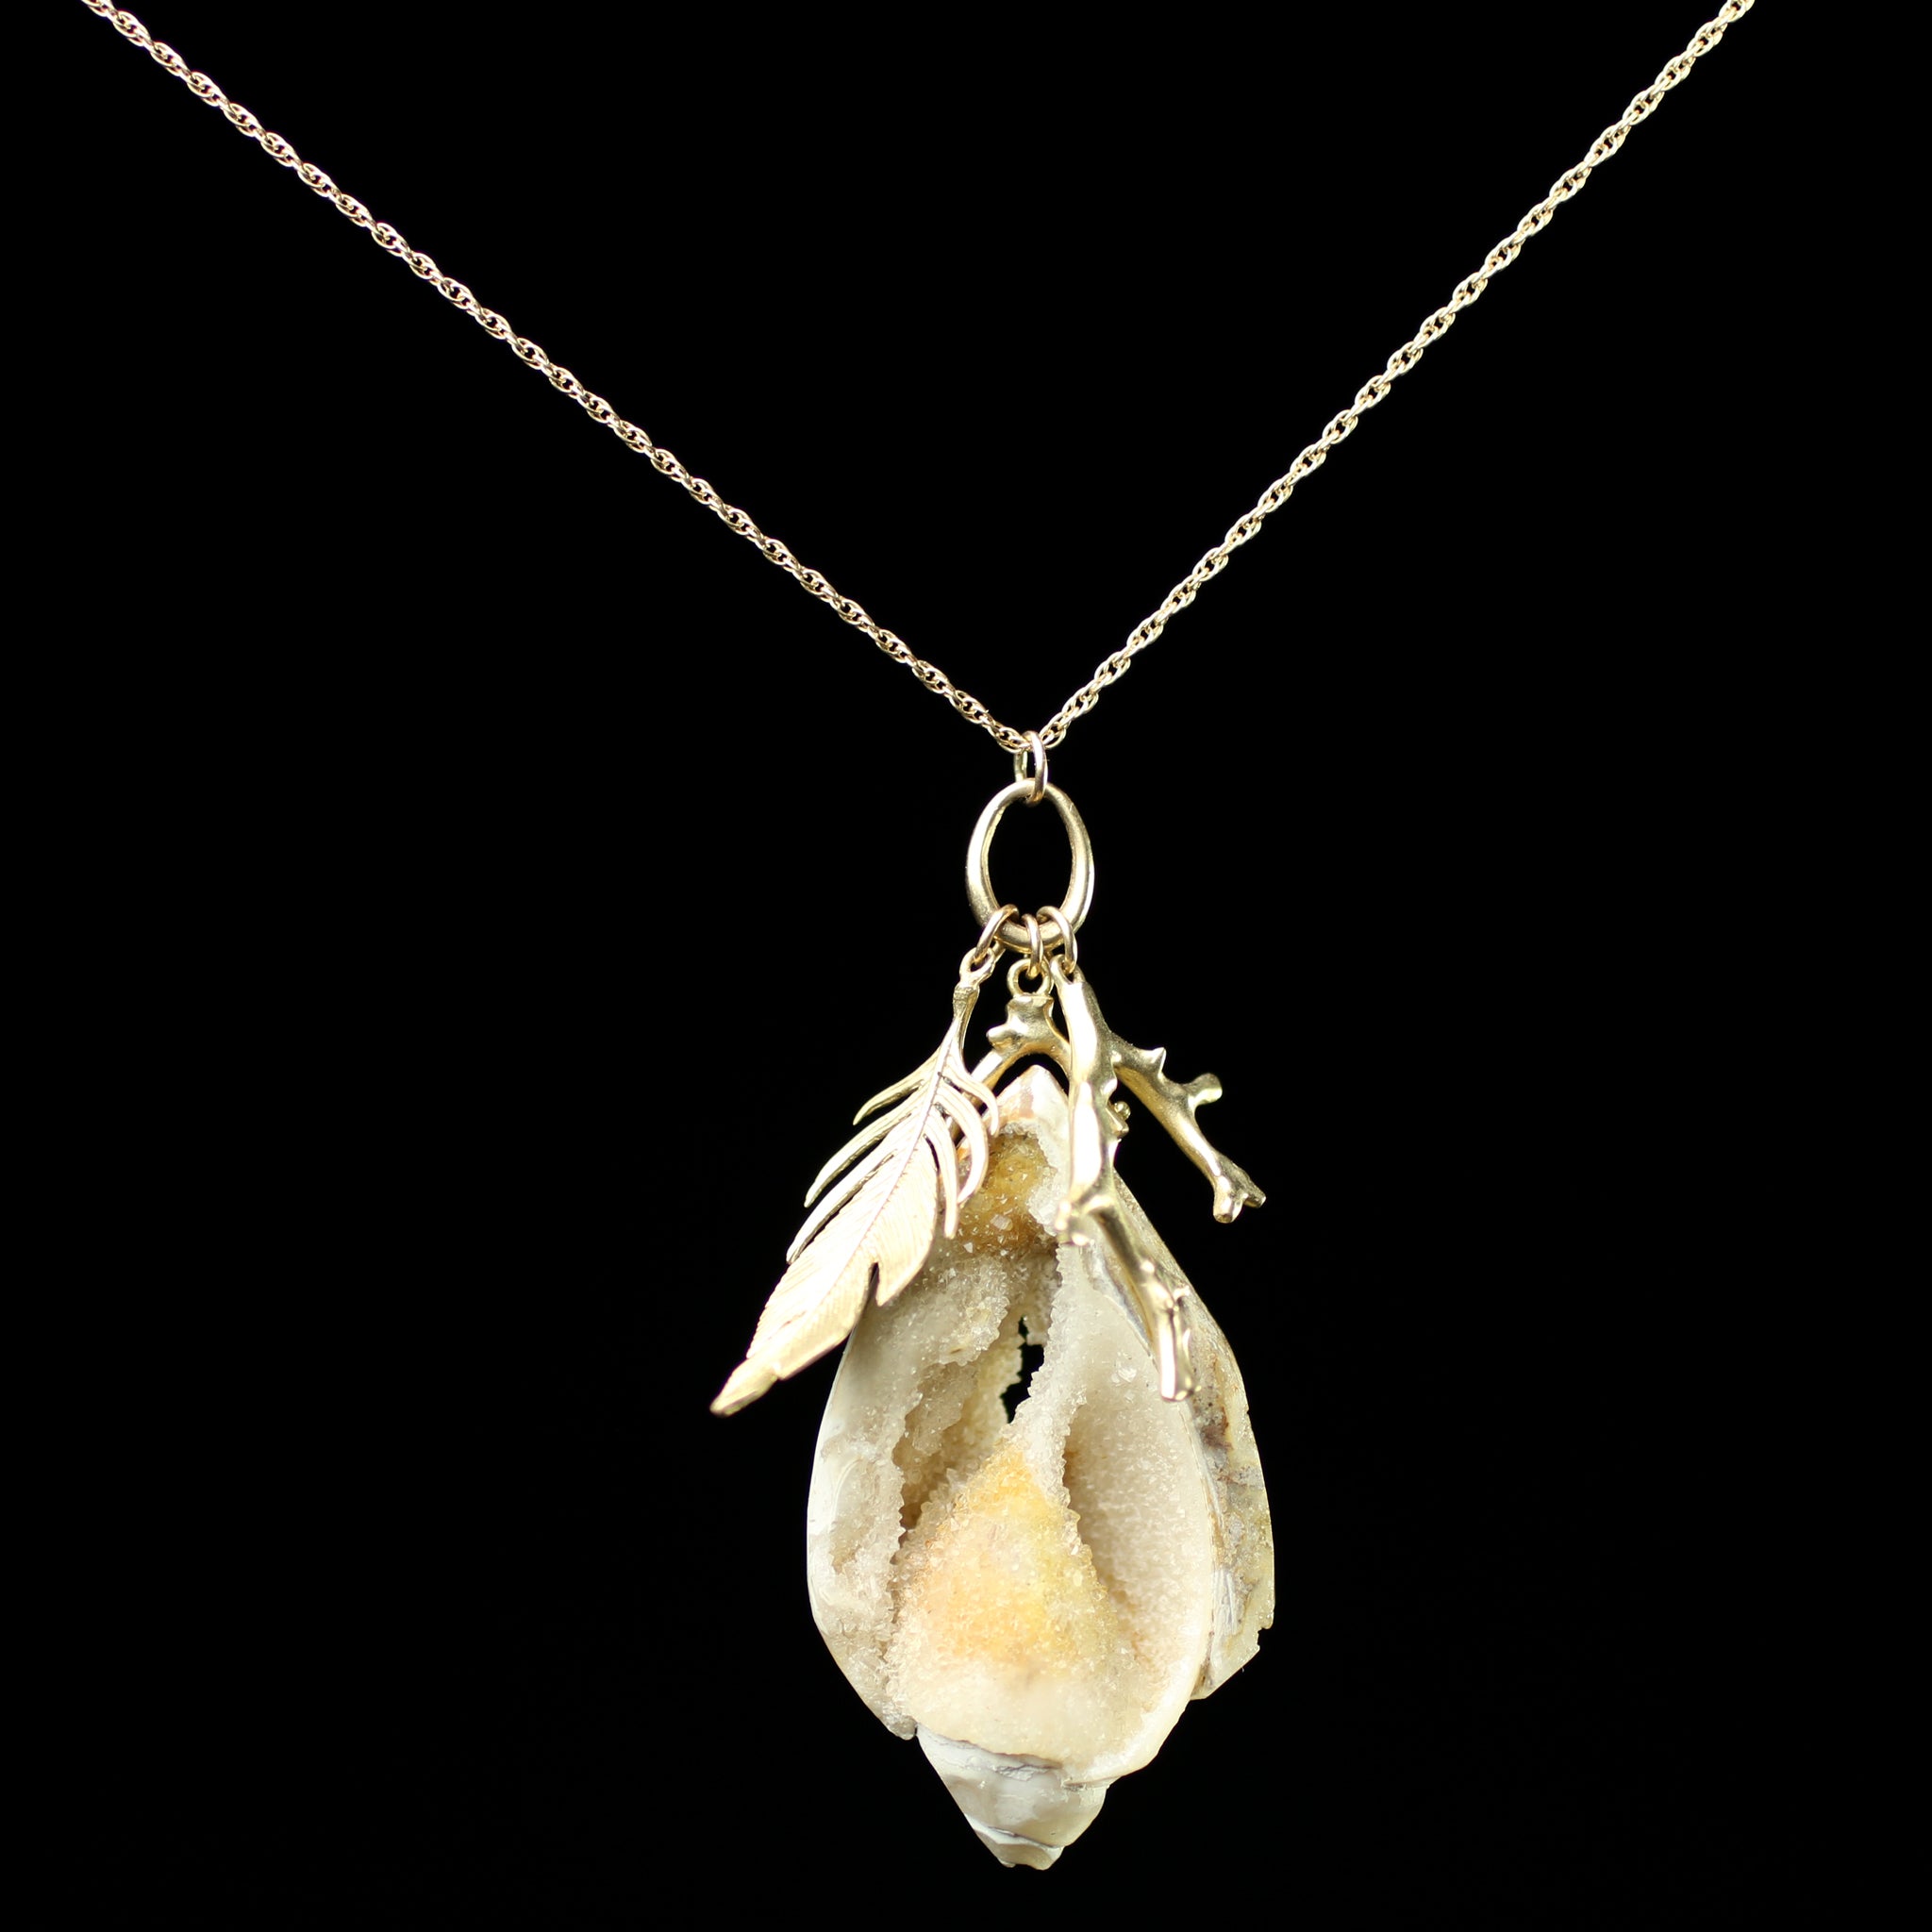 Front view of Beach Scavenger Necklace with shell pendant hanging on chain